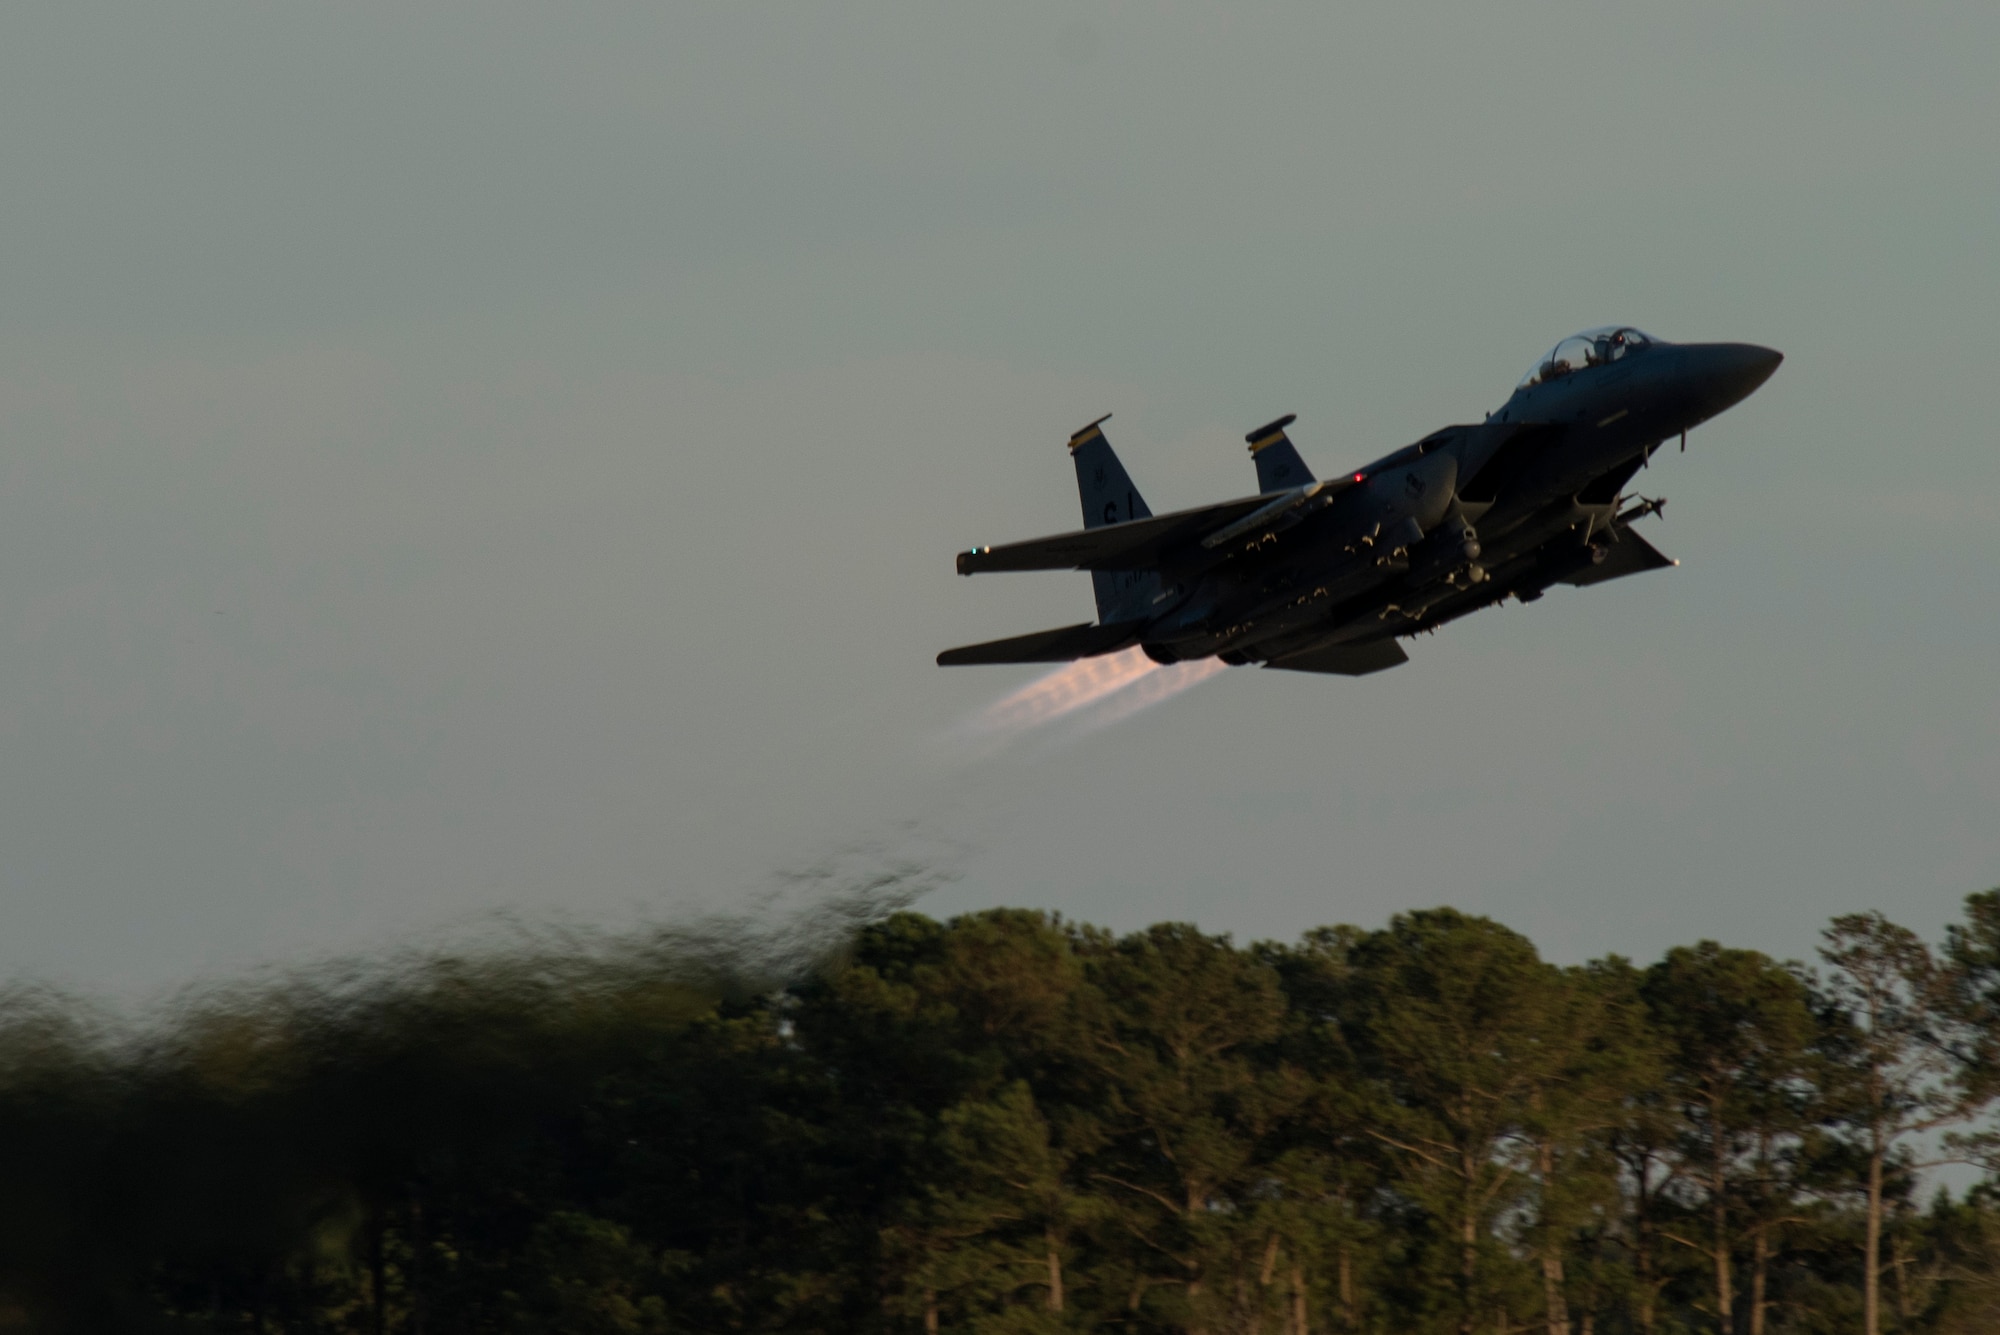 An F-15E Strike Eagle assigned to the 336th Fighter Squadron takes off during exercise Coronet Warrior 17-01, Jan. 31, 2017, at Seymour Johnson Air Force Base, North Carolina. More than 138 aircraft launched during the exercise. (U.S. Air Force photo by Airman Shawna L. Keyes)